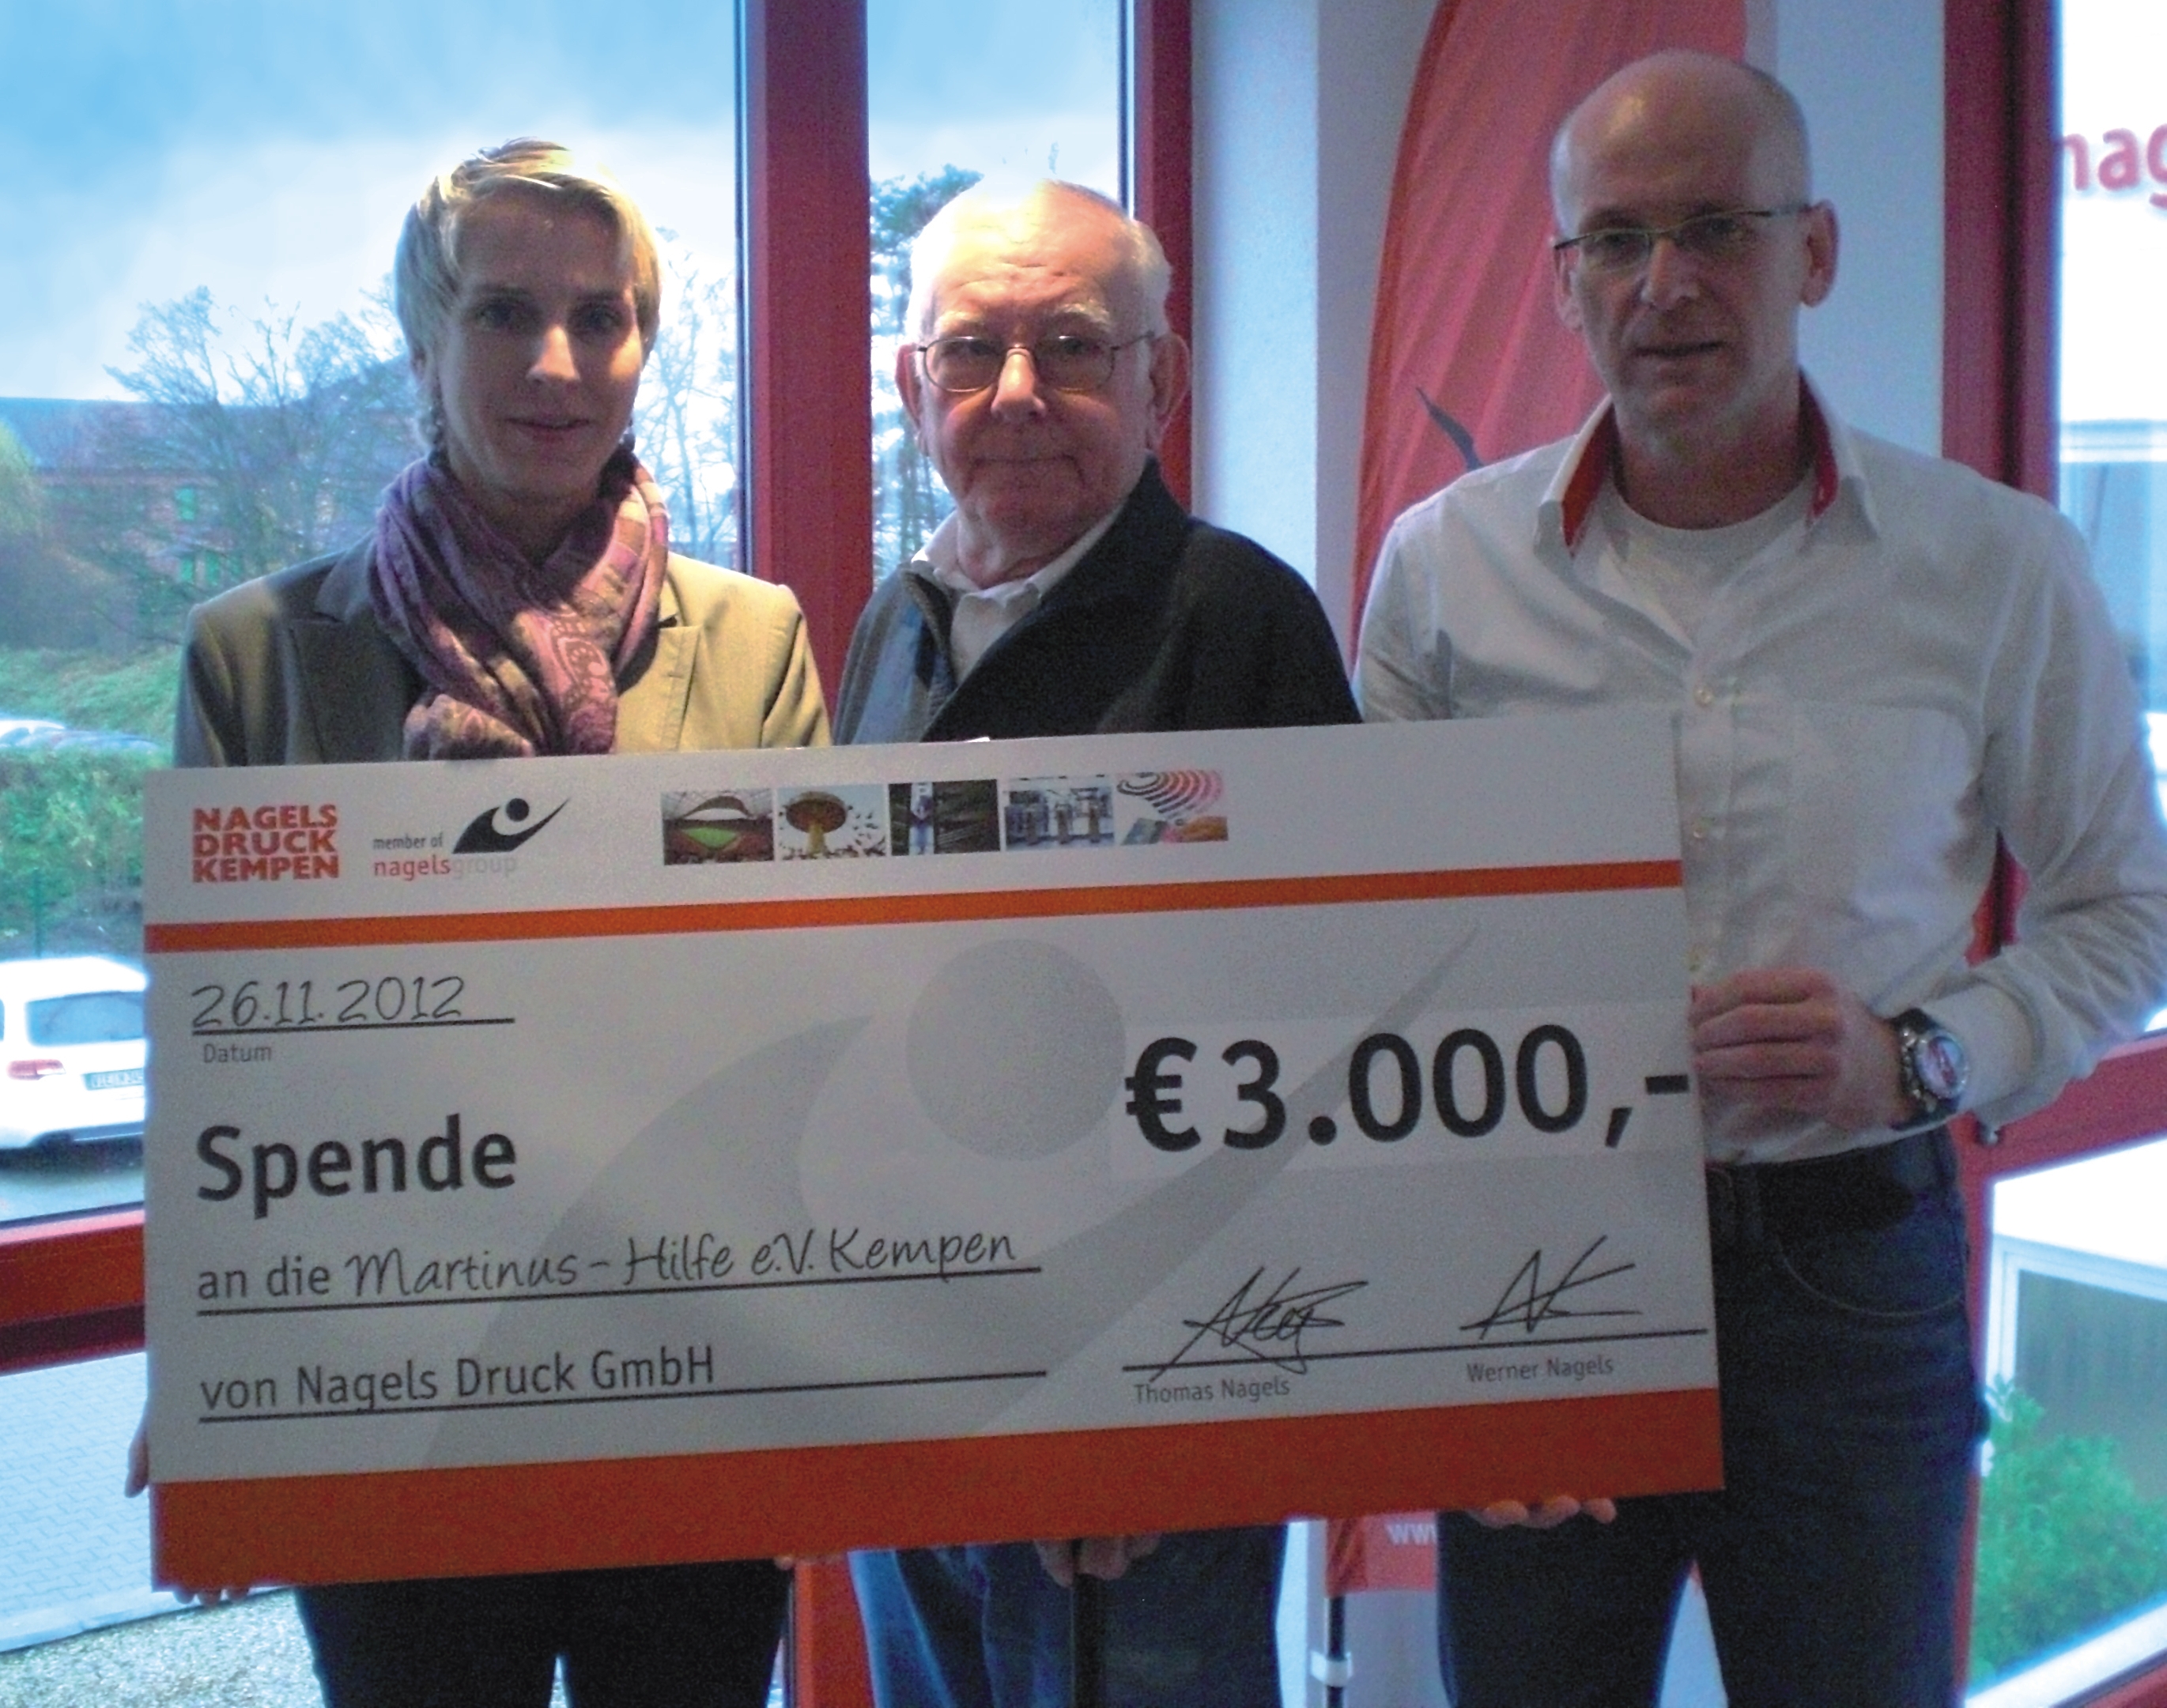 Managing Director (Werner Nagels right) and the groups Marketing Manager Andrea Kamps-de Bruin (left) present a donation cheque to Dieter Sandmann (middle), Chairman of the Board of Martinus – Hilfe e.V.